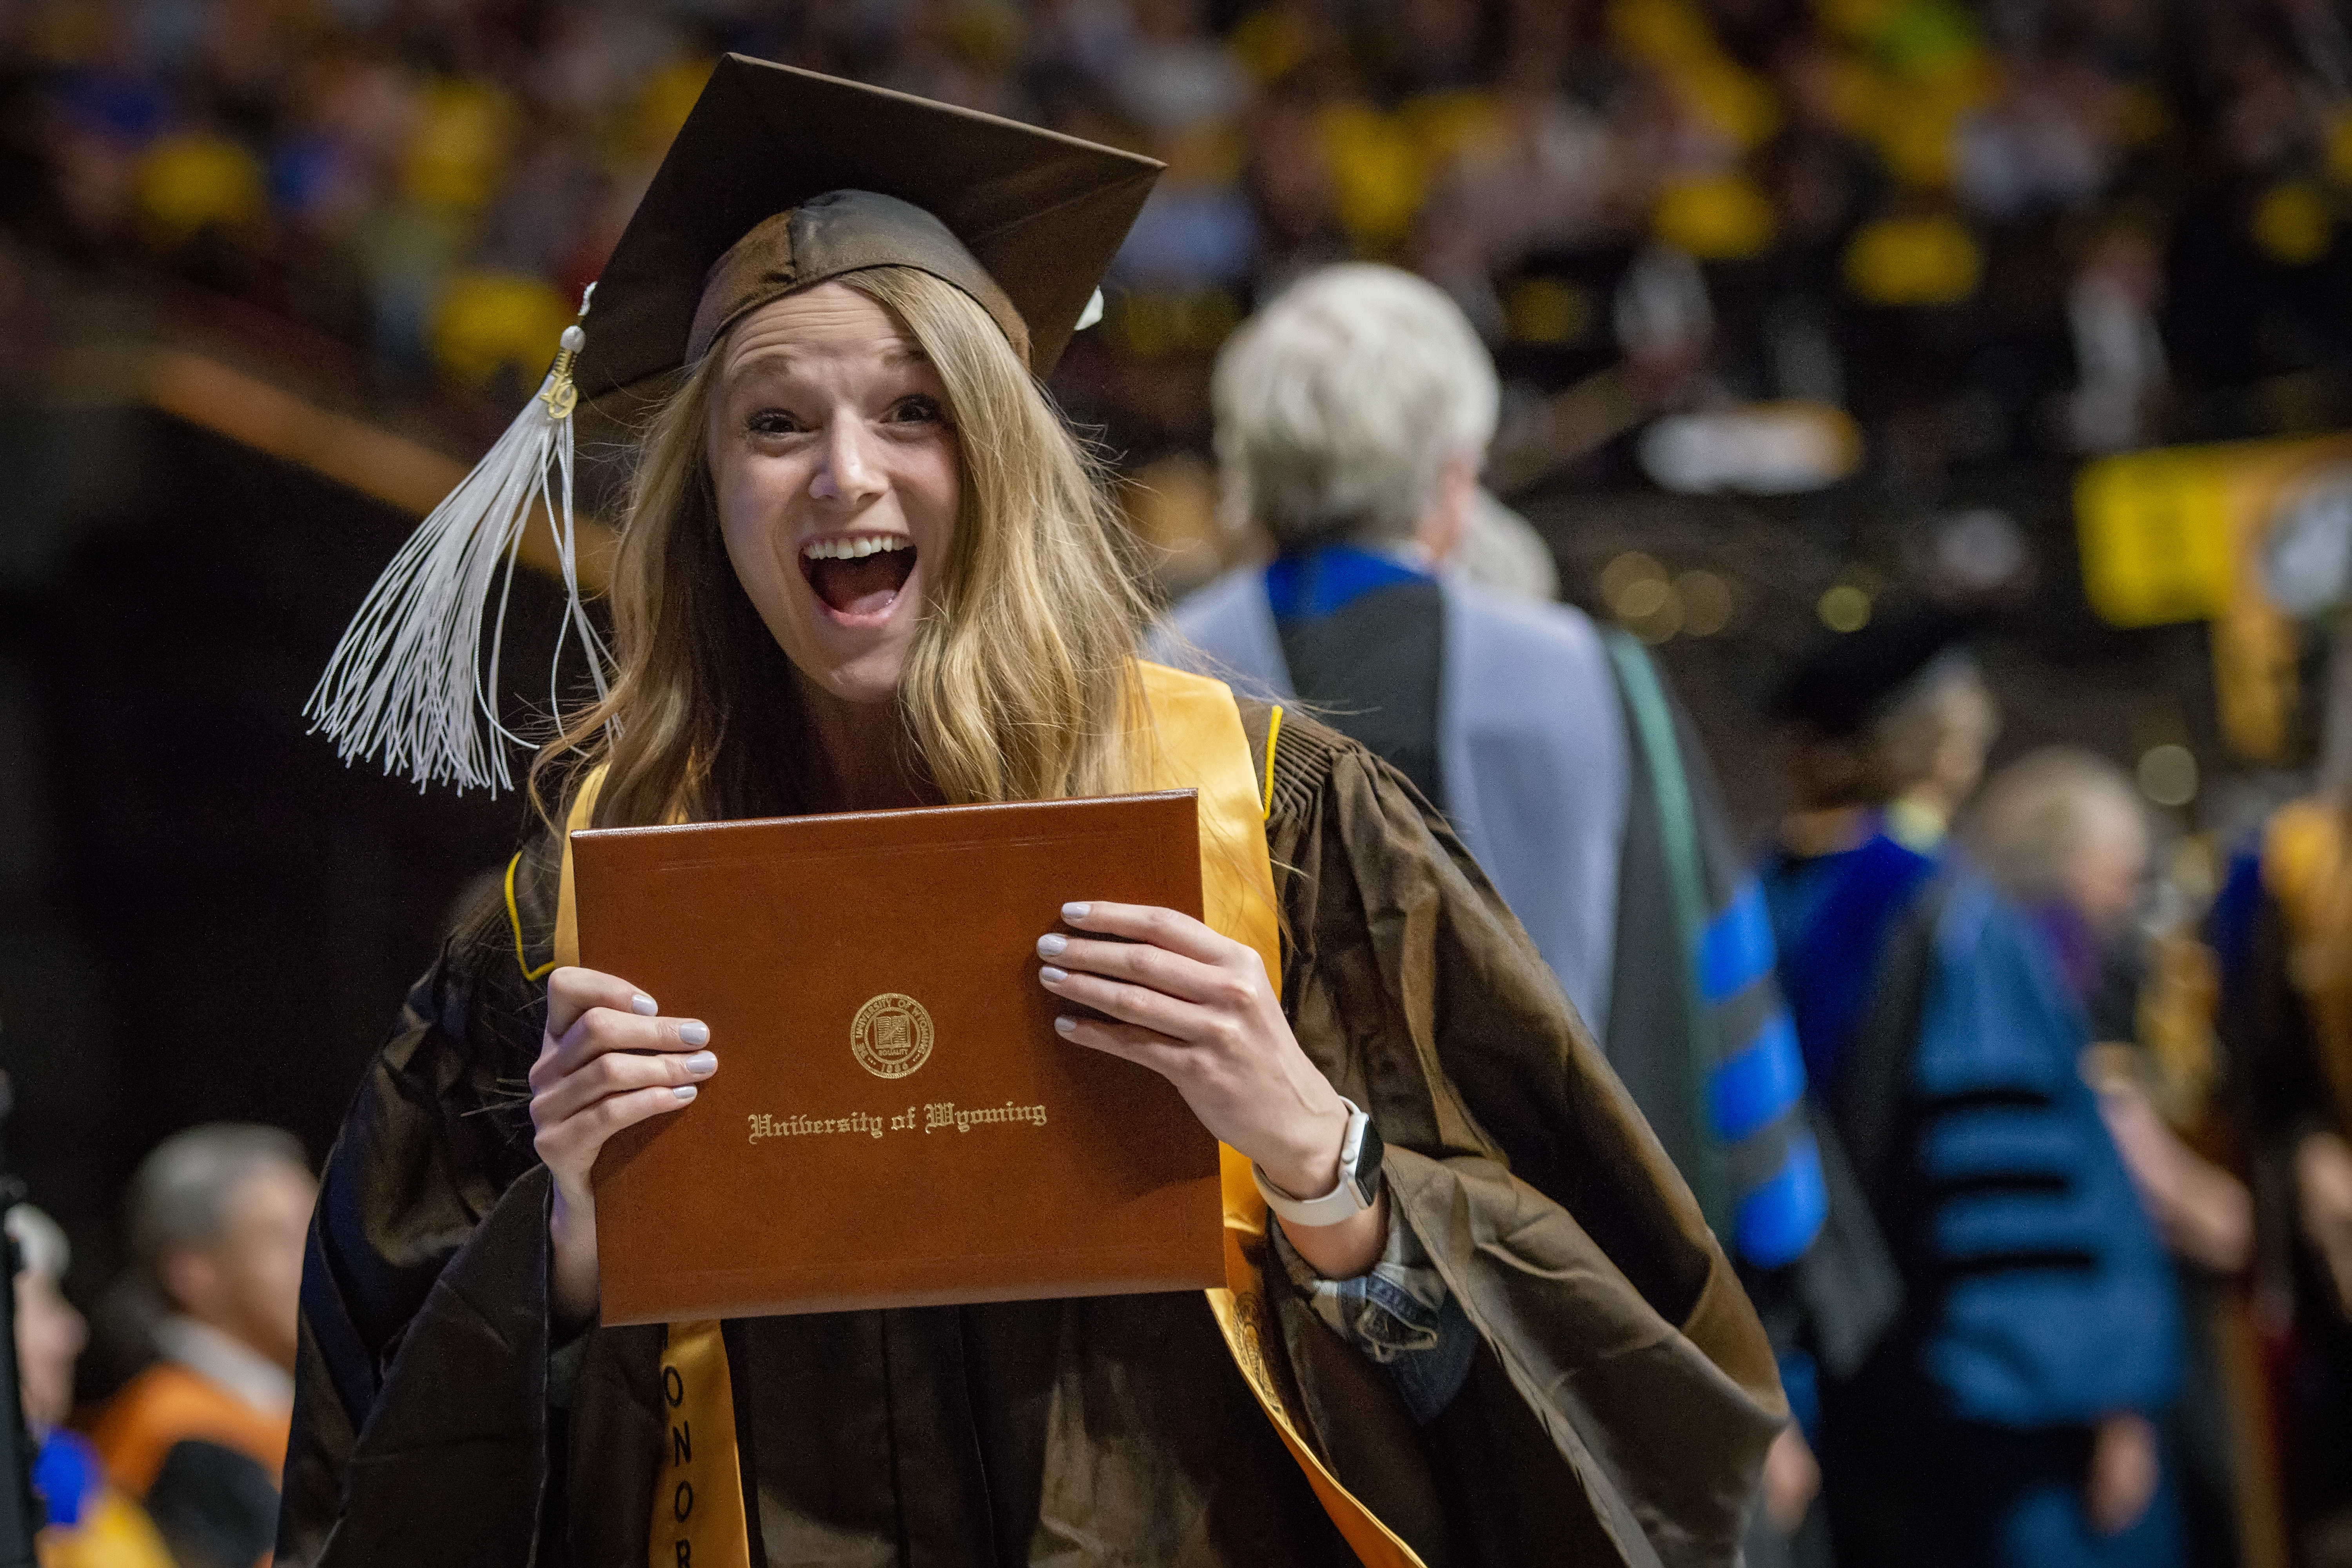 an excited UW student looks very happy while wearing a cap and gown and holding up a diploma.